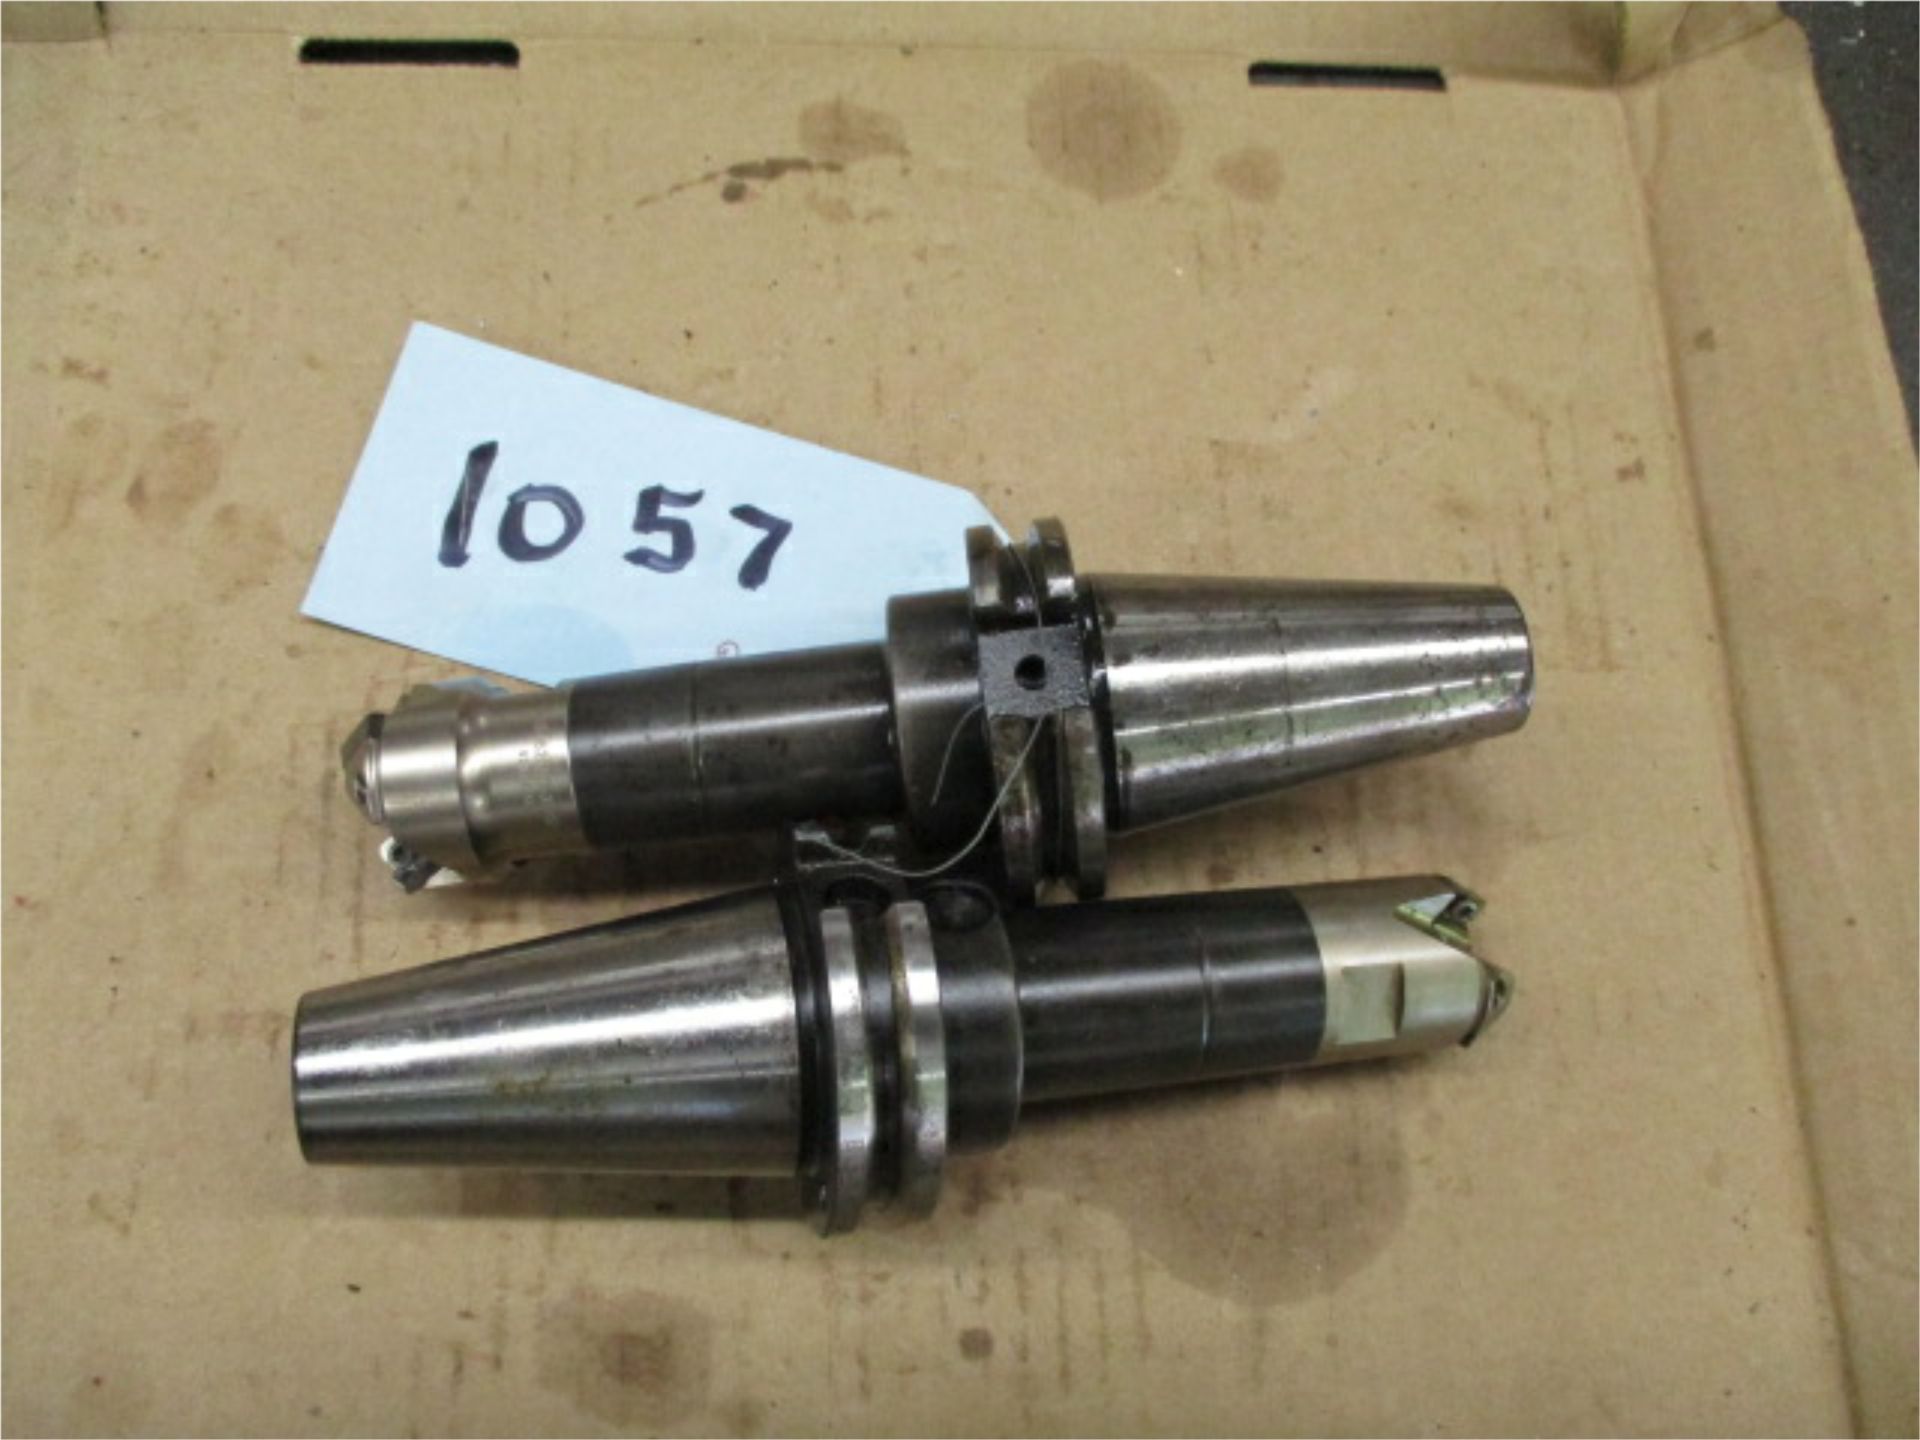 40 Taper Chamger Cutters, 2 pcs